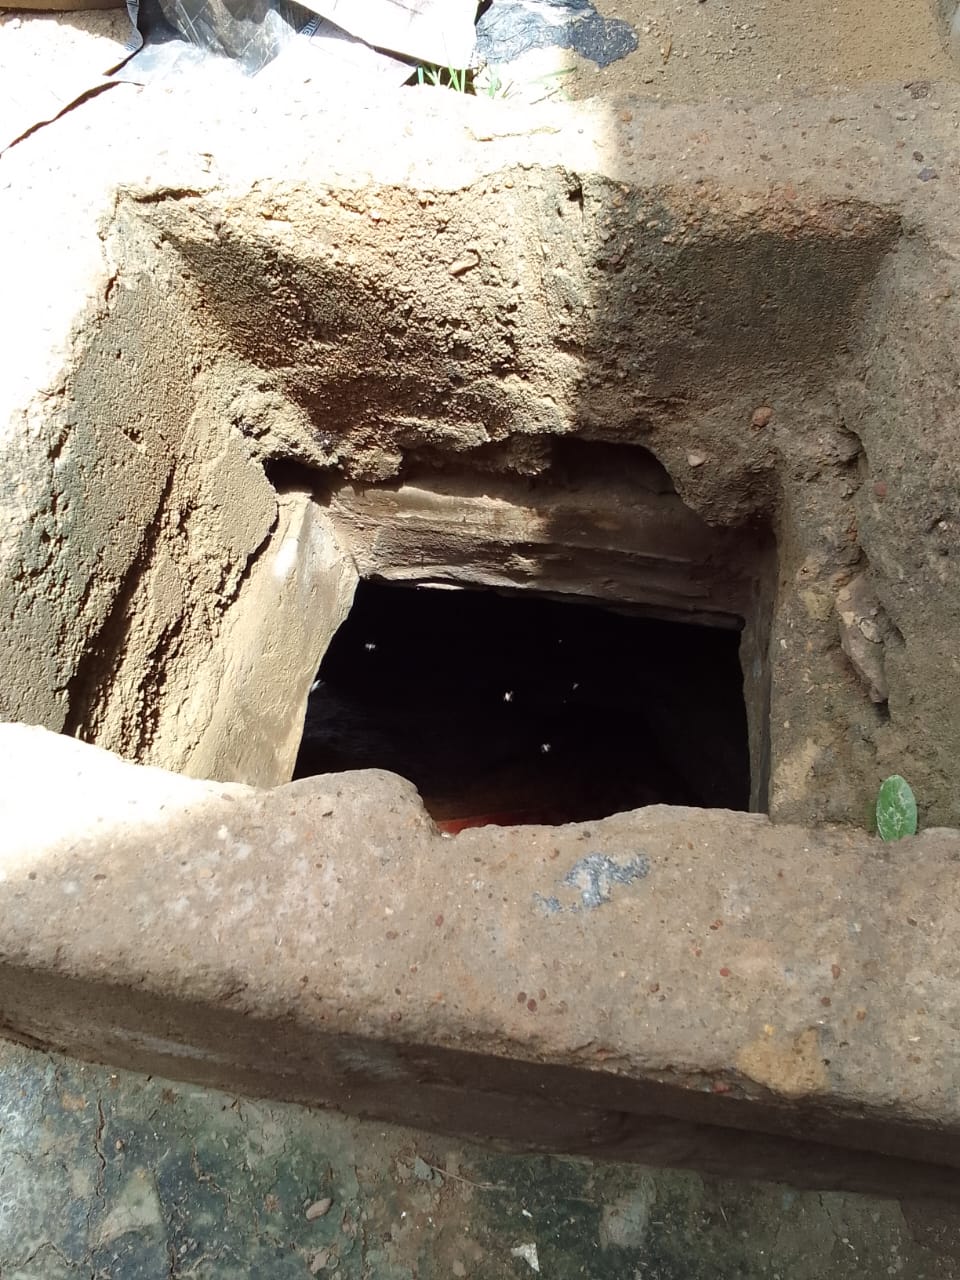 Drowning: 80-Year Man Found In Well After Missing For Six Days